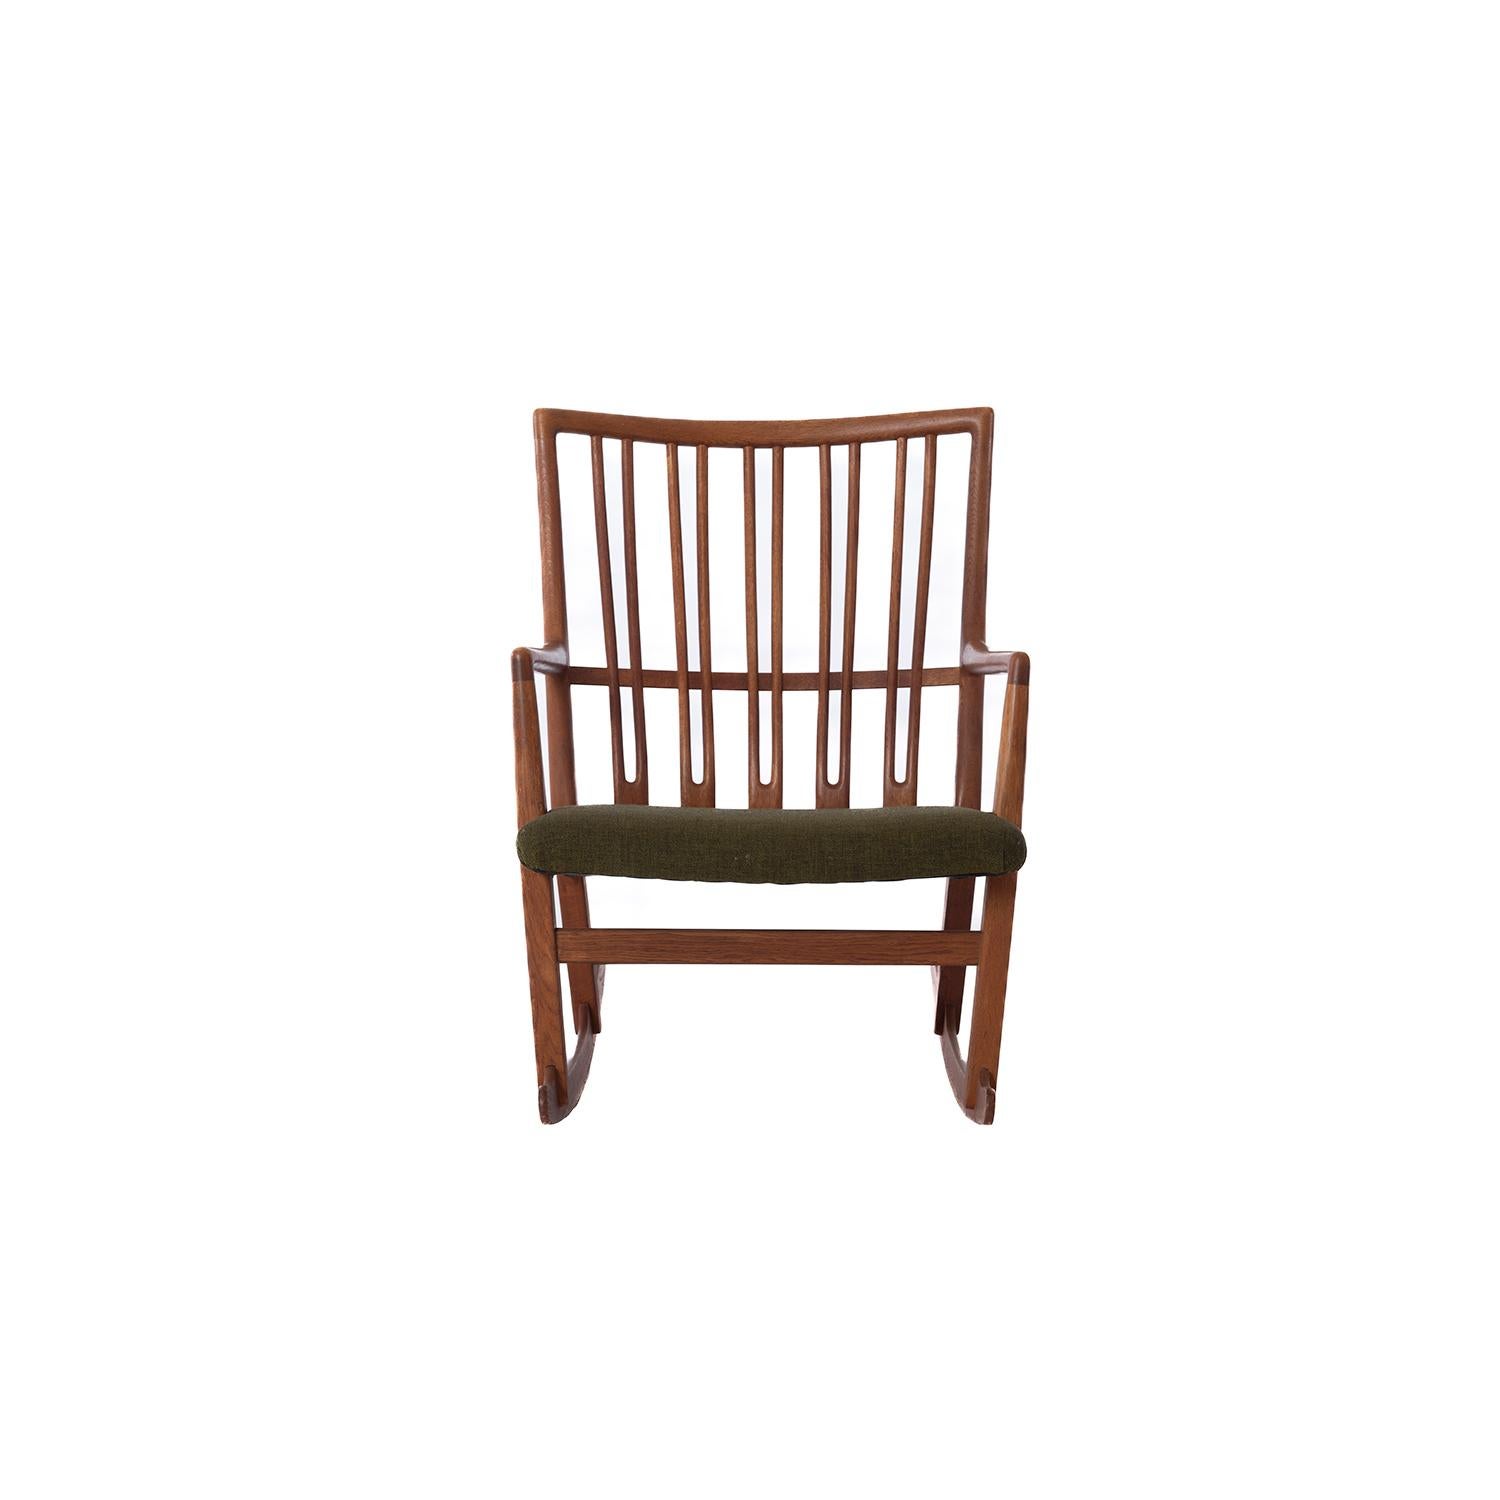 A hard to find Hans J. Wegner designed Oak rocking chair produced by Mikael Laursen. An early rocker design by famed Danish architect. Oak has a rich patina. Upholstered in a green wool. 

Professional, skilled furniture restoration is an integral